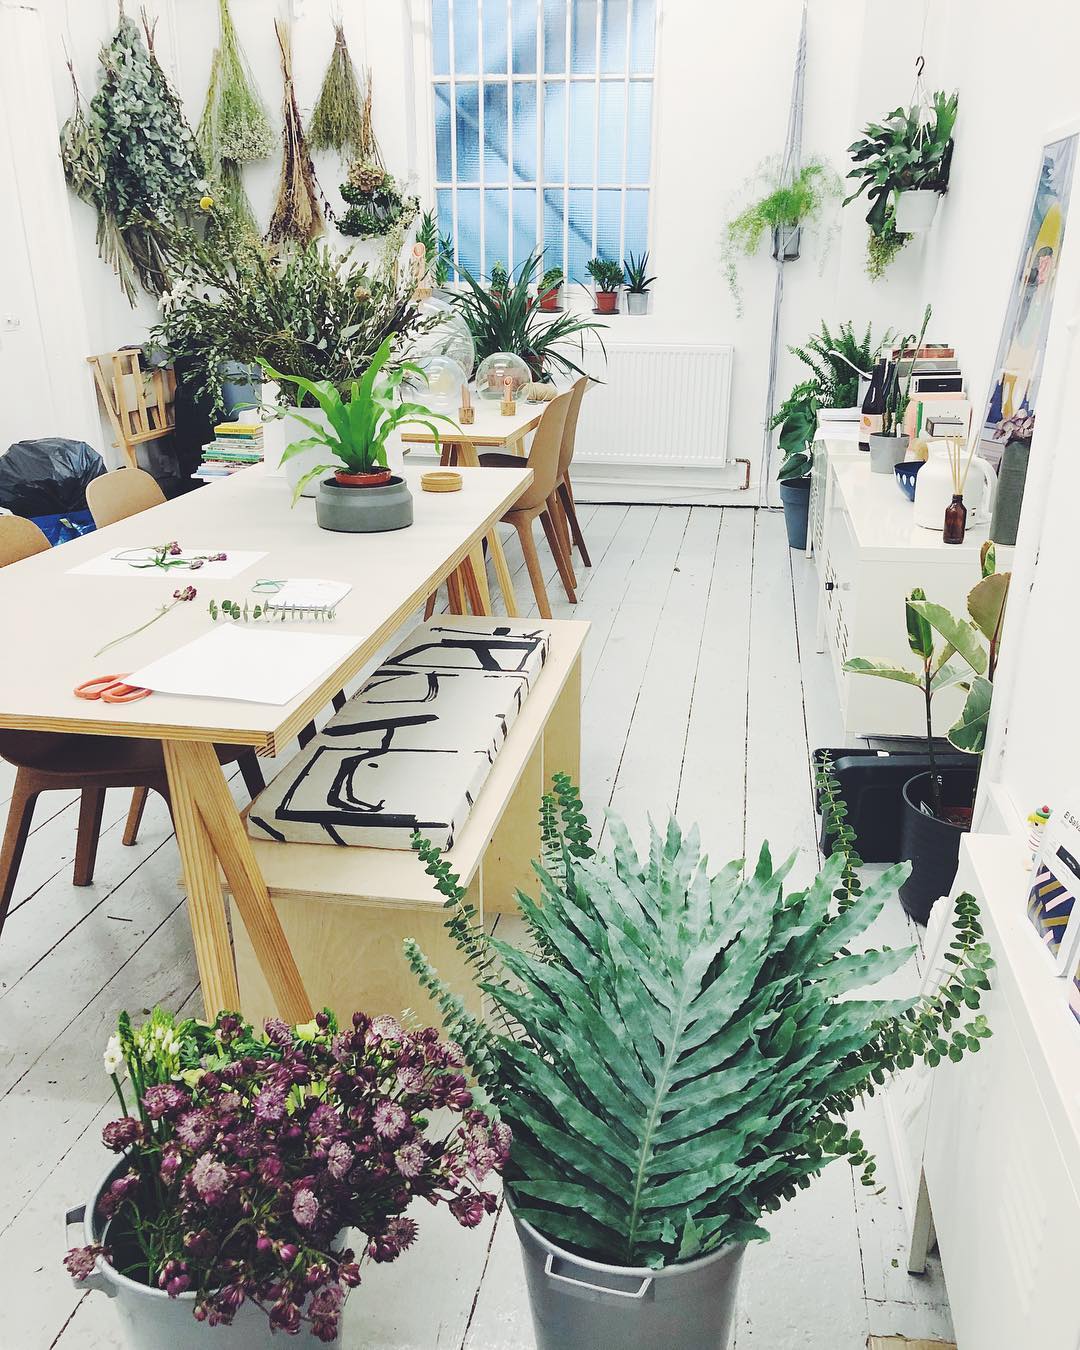 The Plant Room Studio and Shop